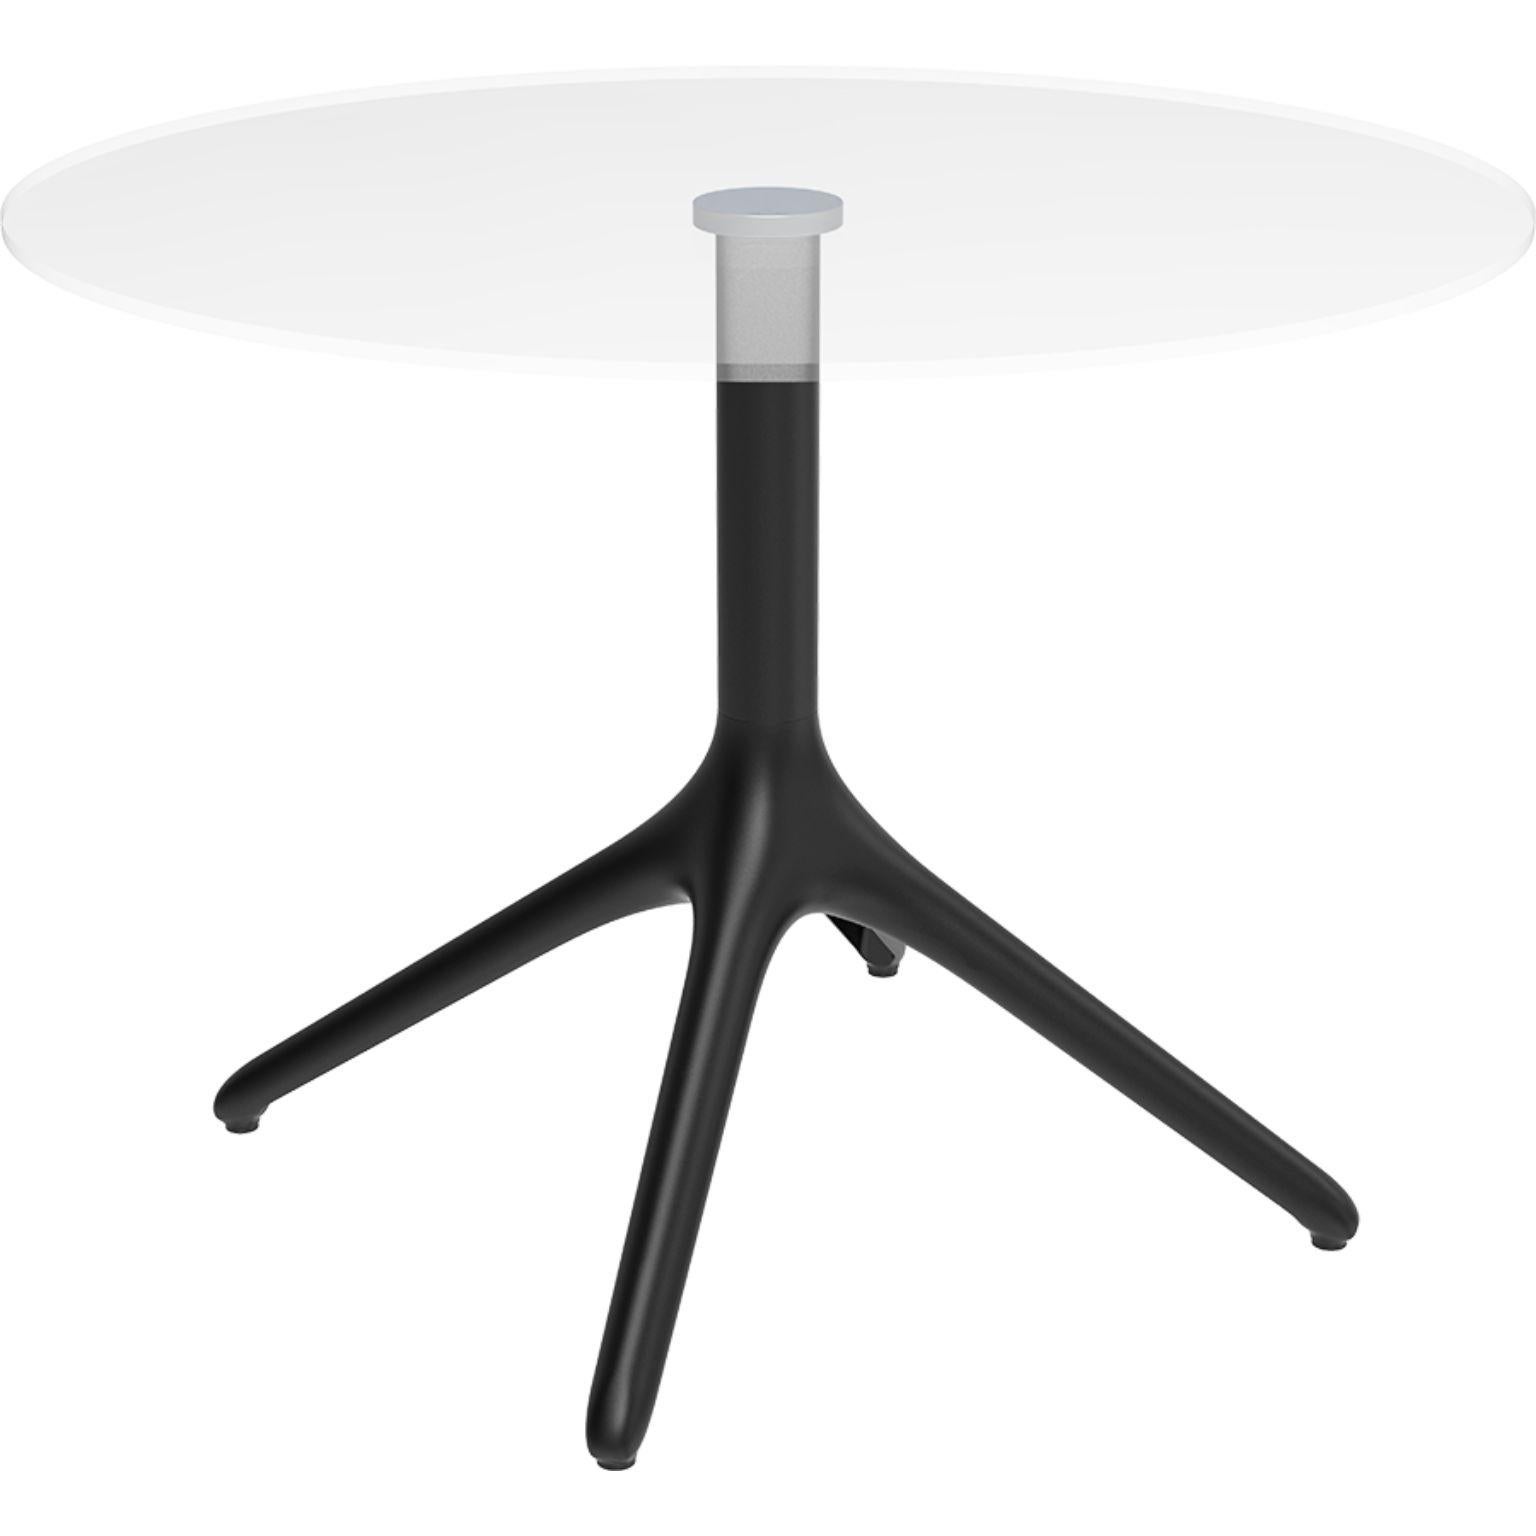 Uni black table XL 73 by Mowee.
Dimensions: D50 x H73 cm.
Material: Aluminium, tempered glass.
Weight: 9 kg
Also Available in different colours and finishes. 

A table designed to be as versatile as possible and can coexist with a variety of